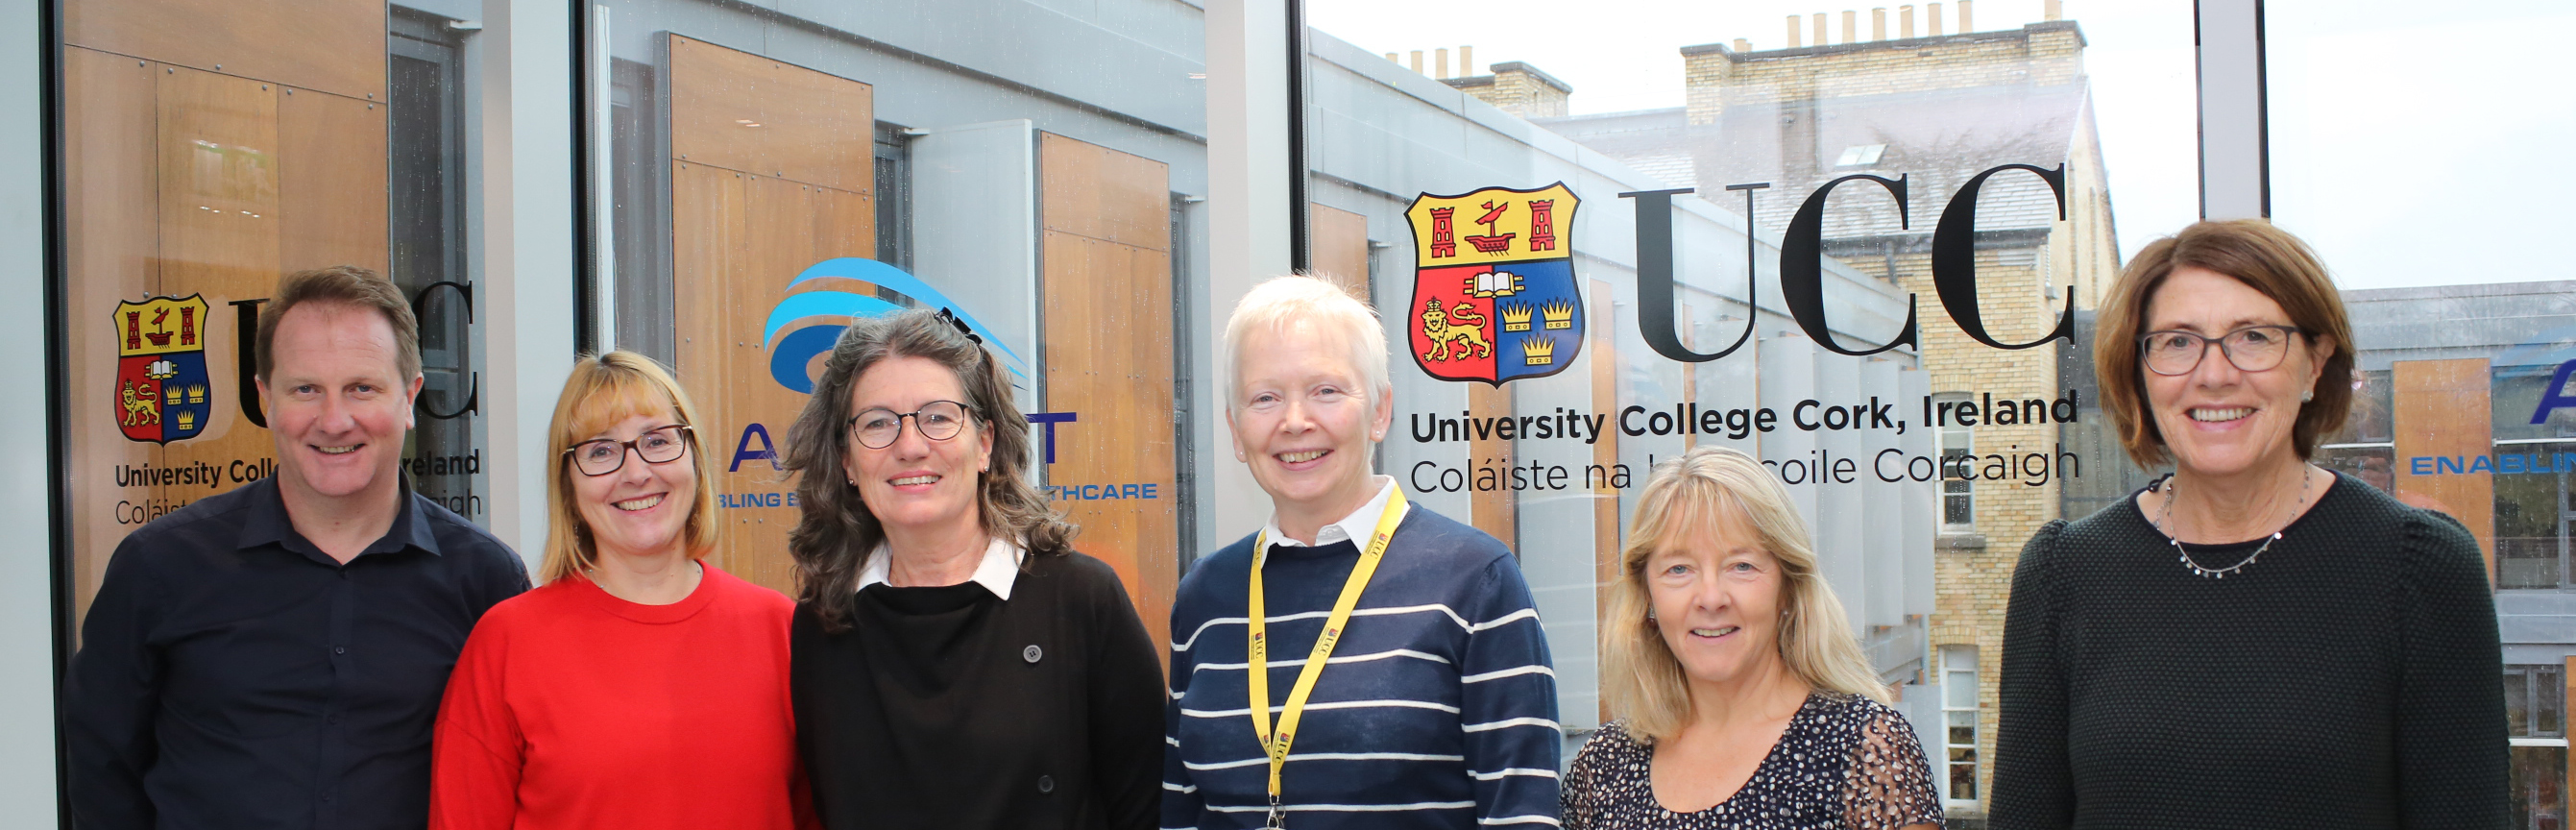 Visit from the University of the Artic in Tromsø, Norway
